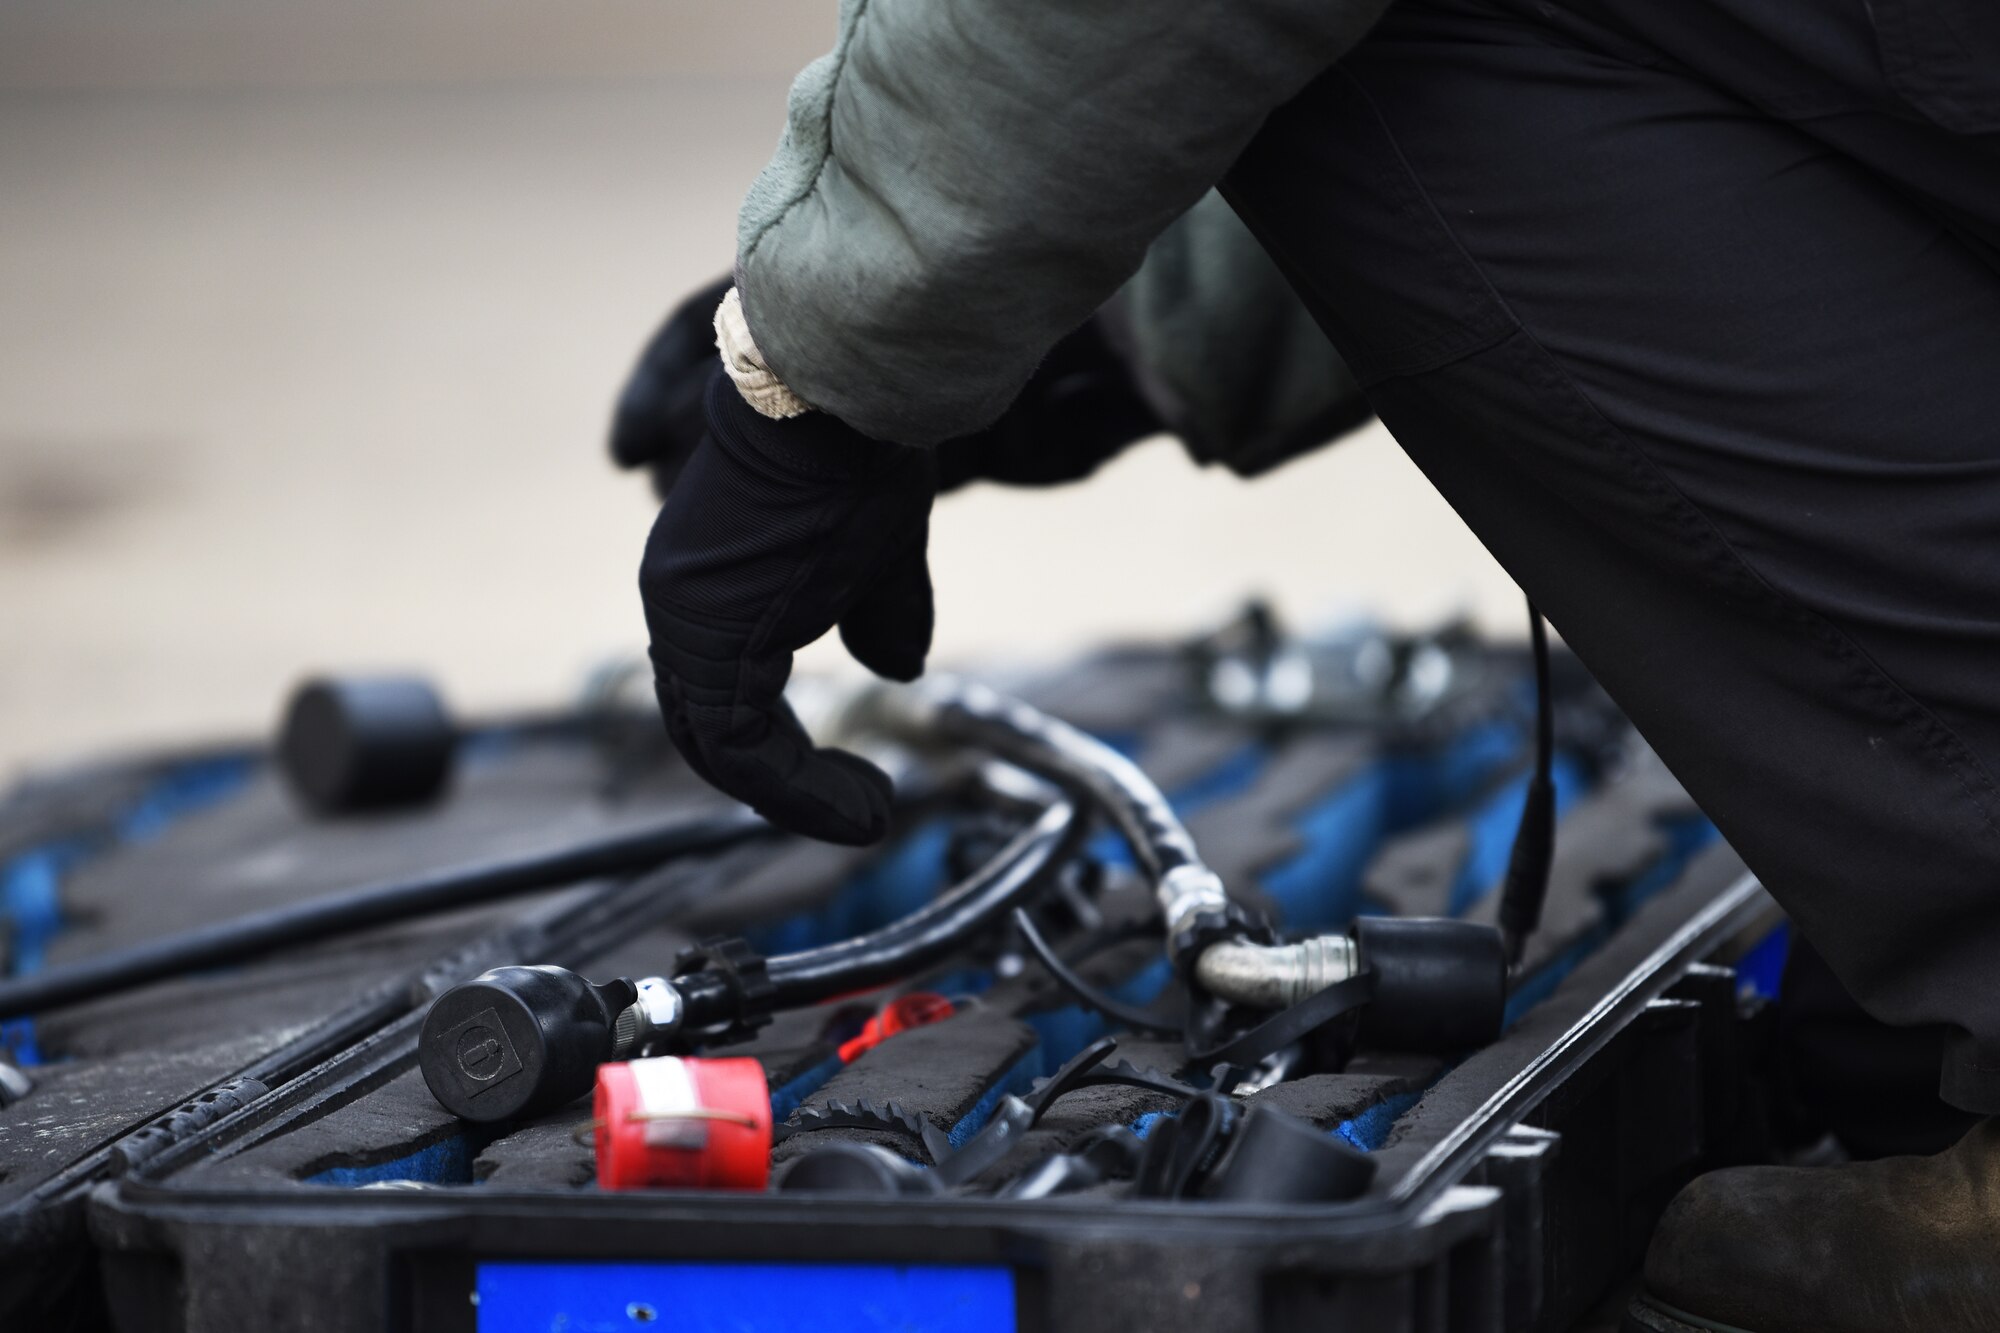 A 492nd Aircraft Maintenance Unit Airman replace aircraft weapons maintenance tools at Royal Air Force Lakenheath, England, Jan. 7, 2019. Aircraft maintenance personnel must maintain complete accountability of tools in accordance with equipment control policies and foreign object damage prevention. (U.S. Air Force photo by Airman 1st Class Shanice Williams-Jones)